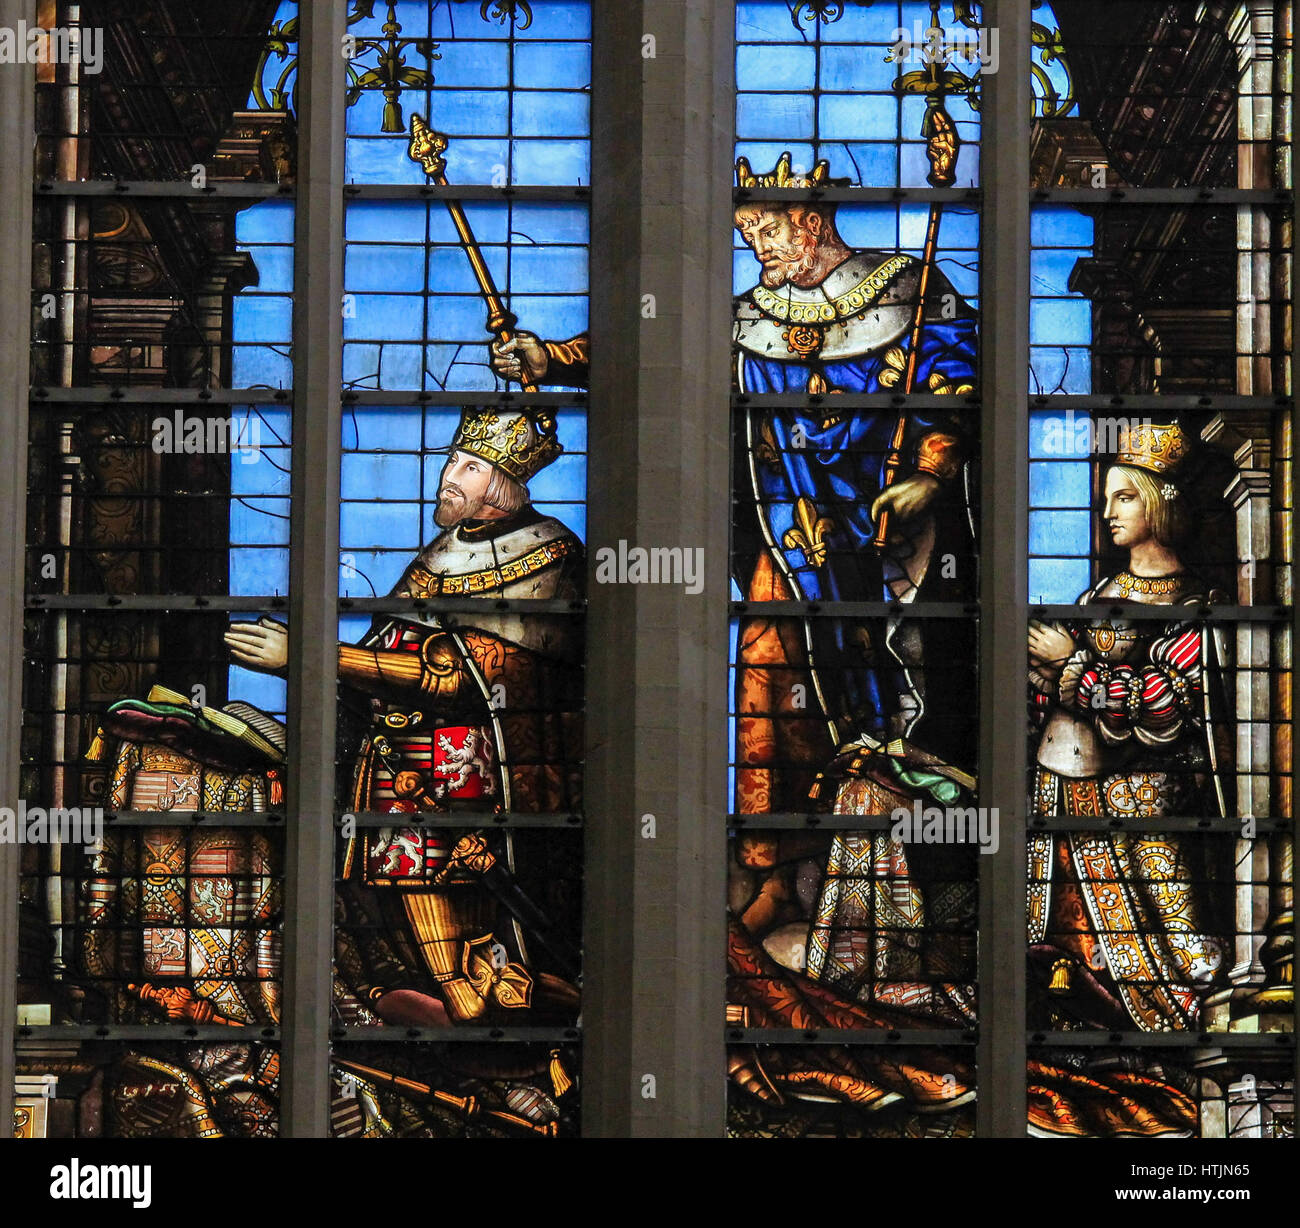 Stained glass depicting Louis II of Hungary, his patron St Louis and his wife Marie (sister of Charles V), in the Cathedral of Brussels, Belgium. Stock Photo